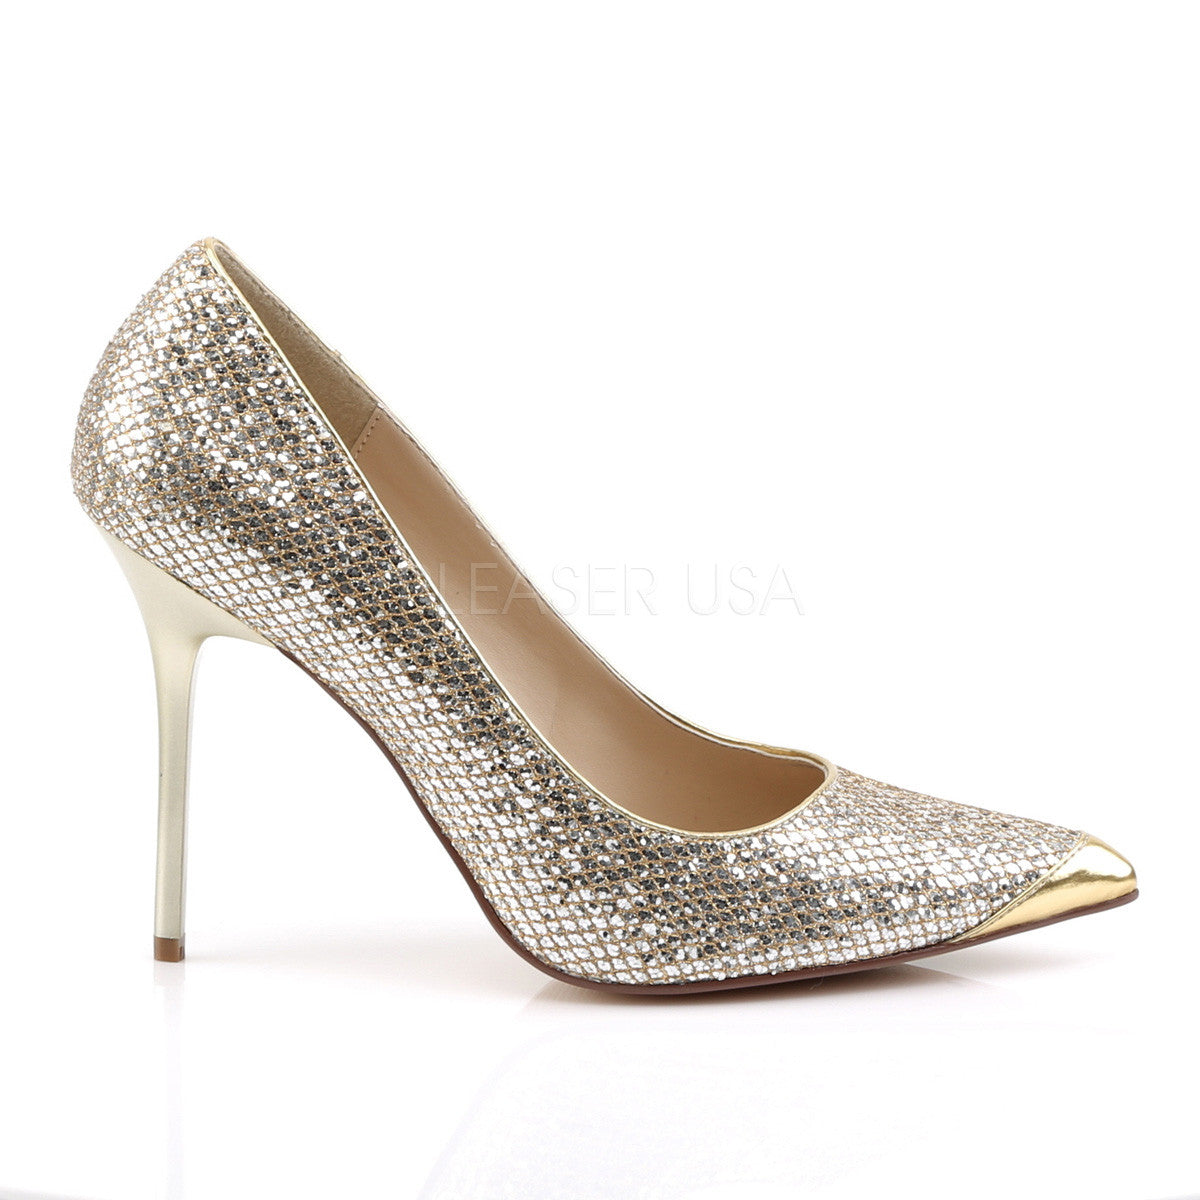 Pleaser CLASSIQUE-20 Gold Glittery Lame Fabric Pointed-Toe Pumps - Shoecup.com - 5